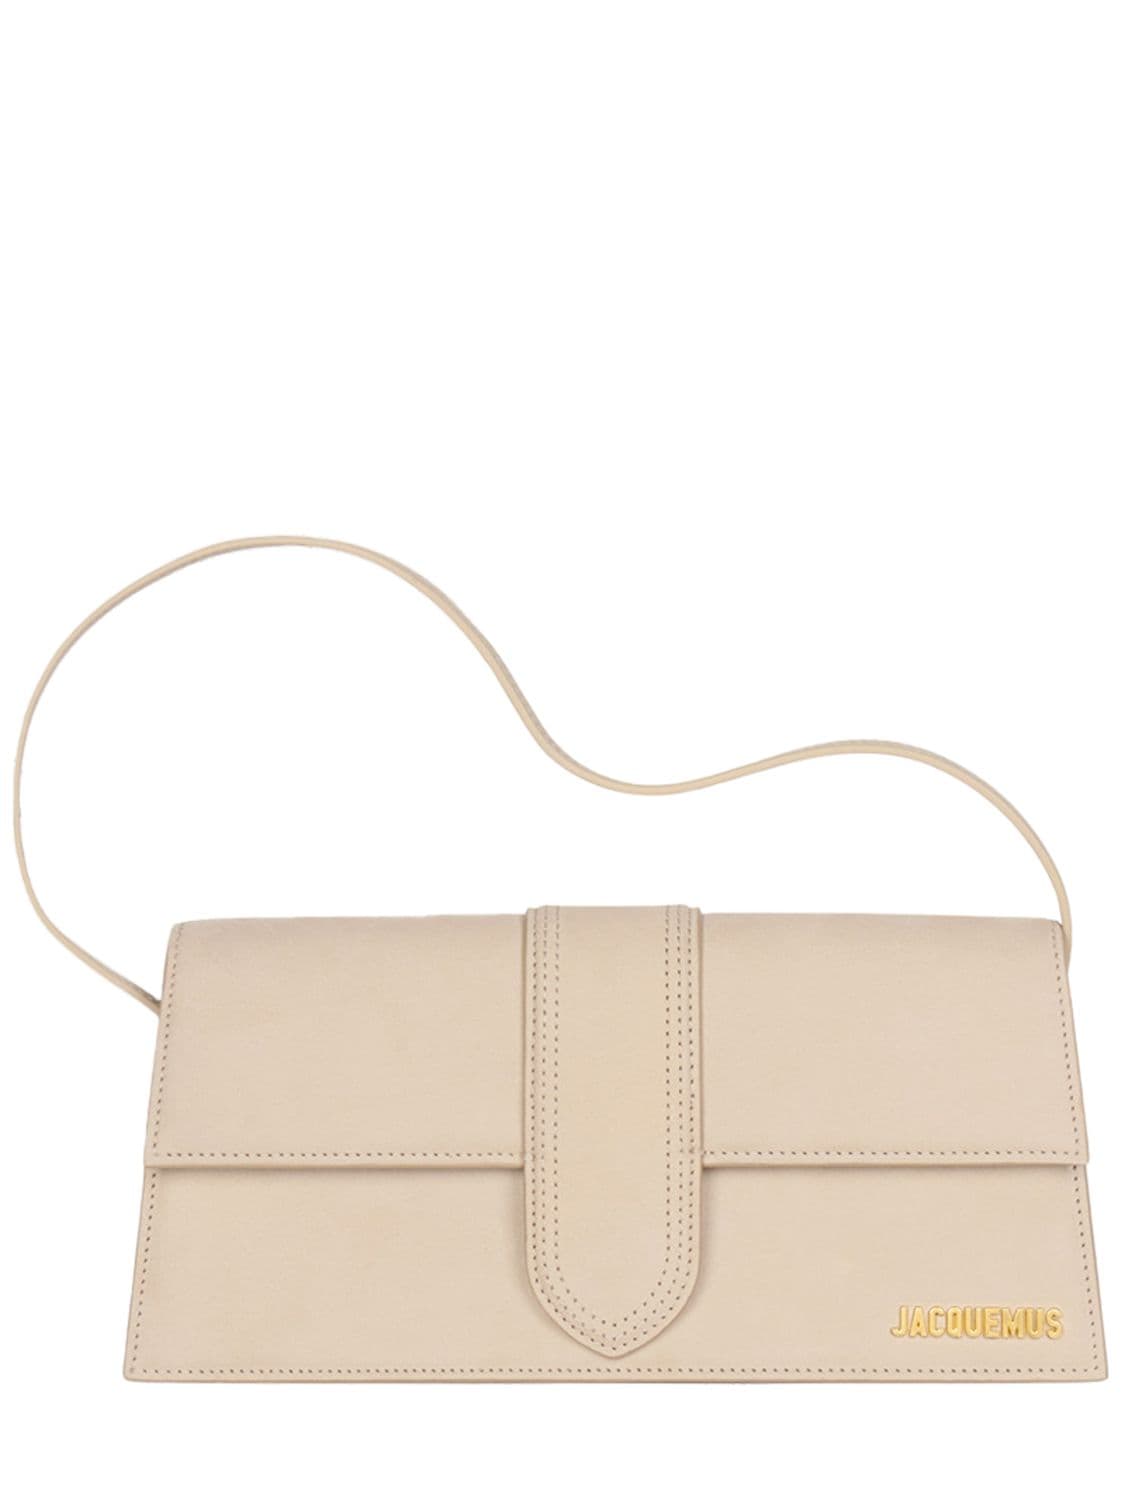 Jacquemus Le Bambino Long Leather Shoulder Bag In Dark Beige